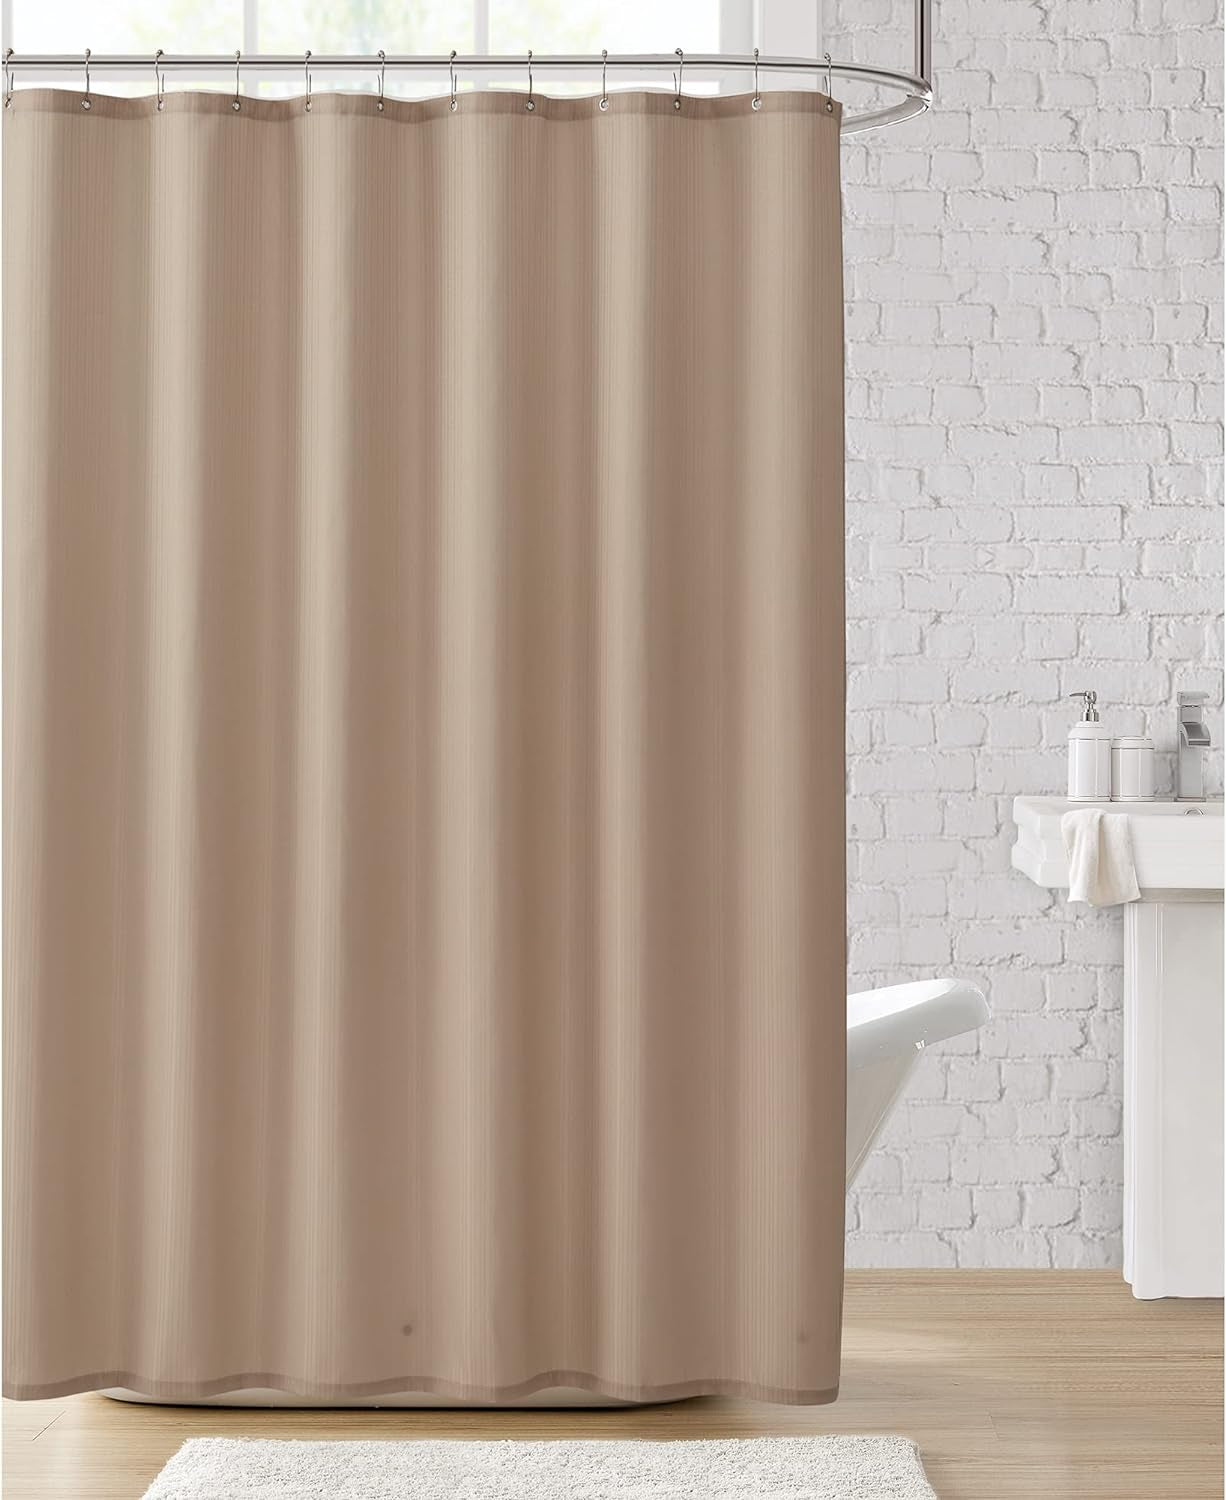 Clorox Treated Polyester Fabric Shower Curtain 70"X72" Tan Taupe with Weighted Magnetic Hem, Machine Washable